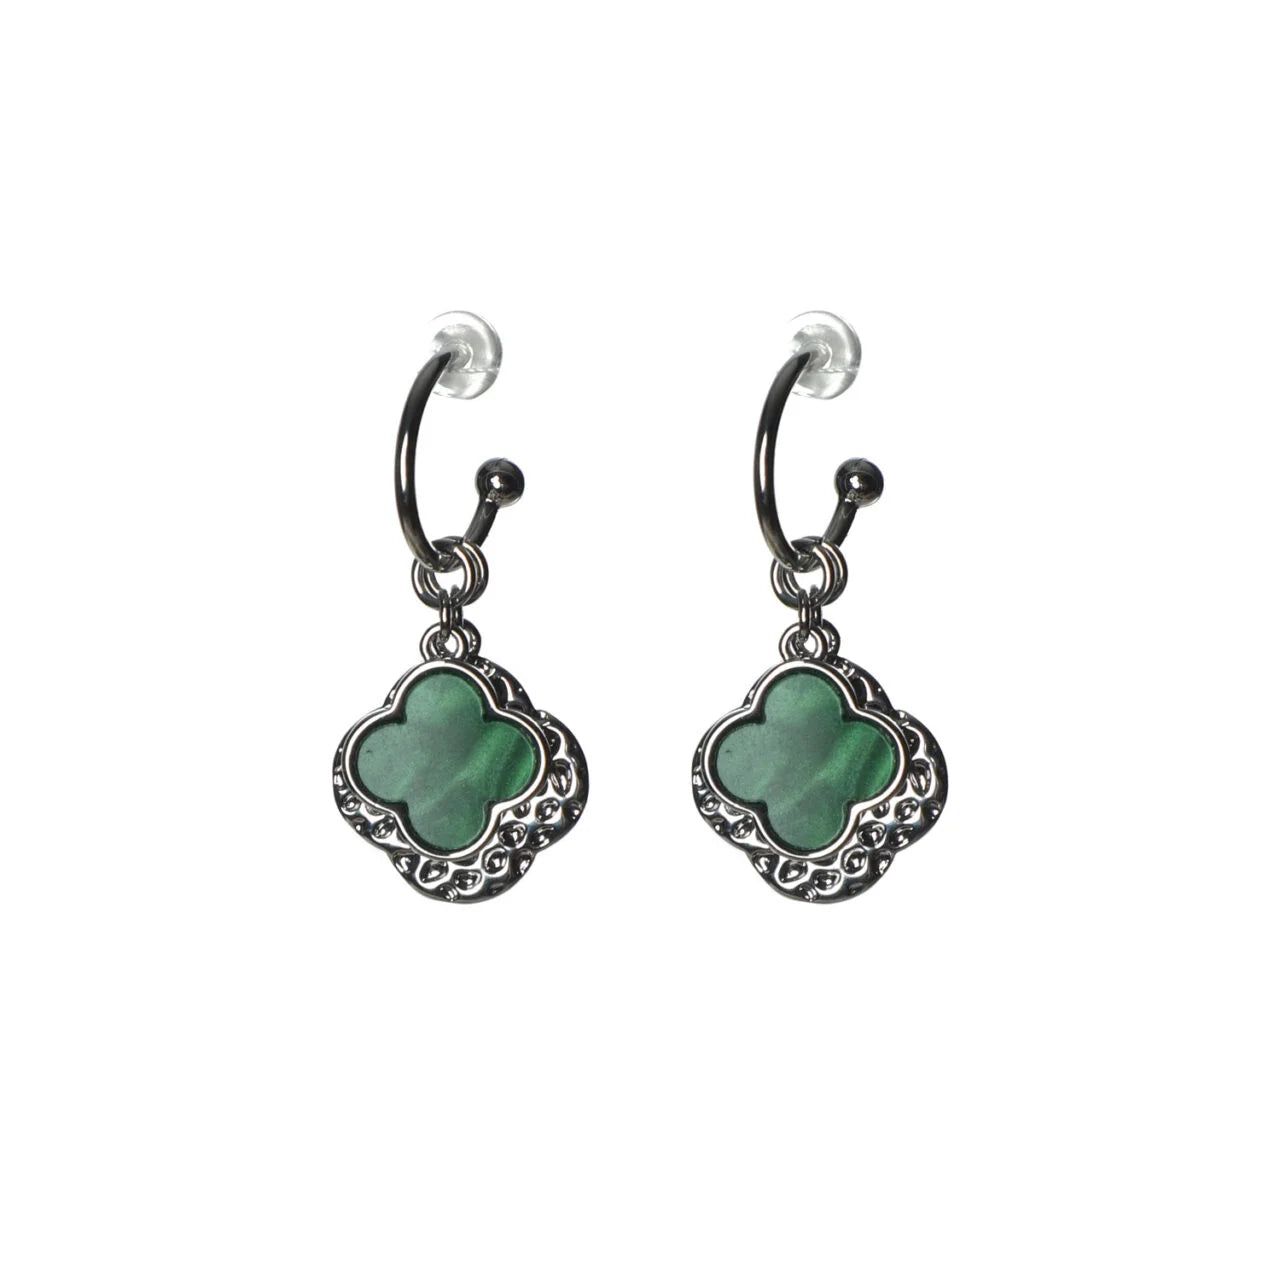 Fabulous Gifts Jewellery Earrings Double Clover Green Silver by Weirs of Baggot Street